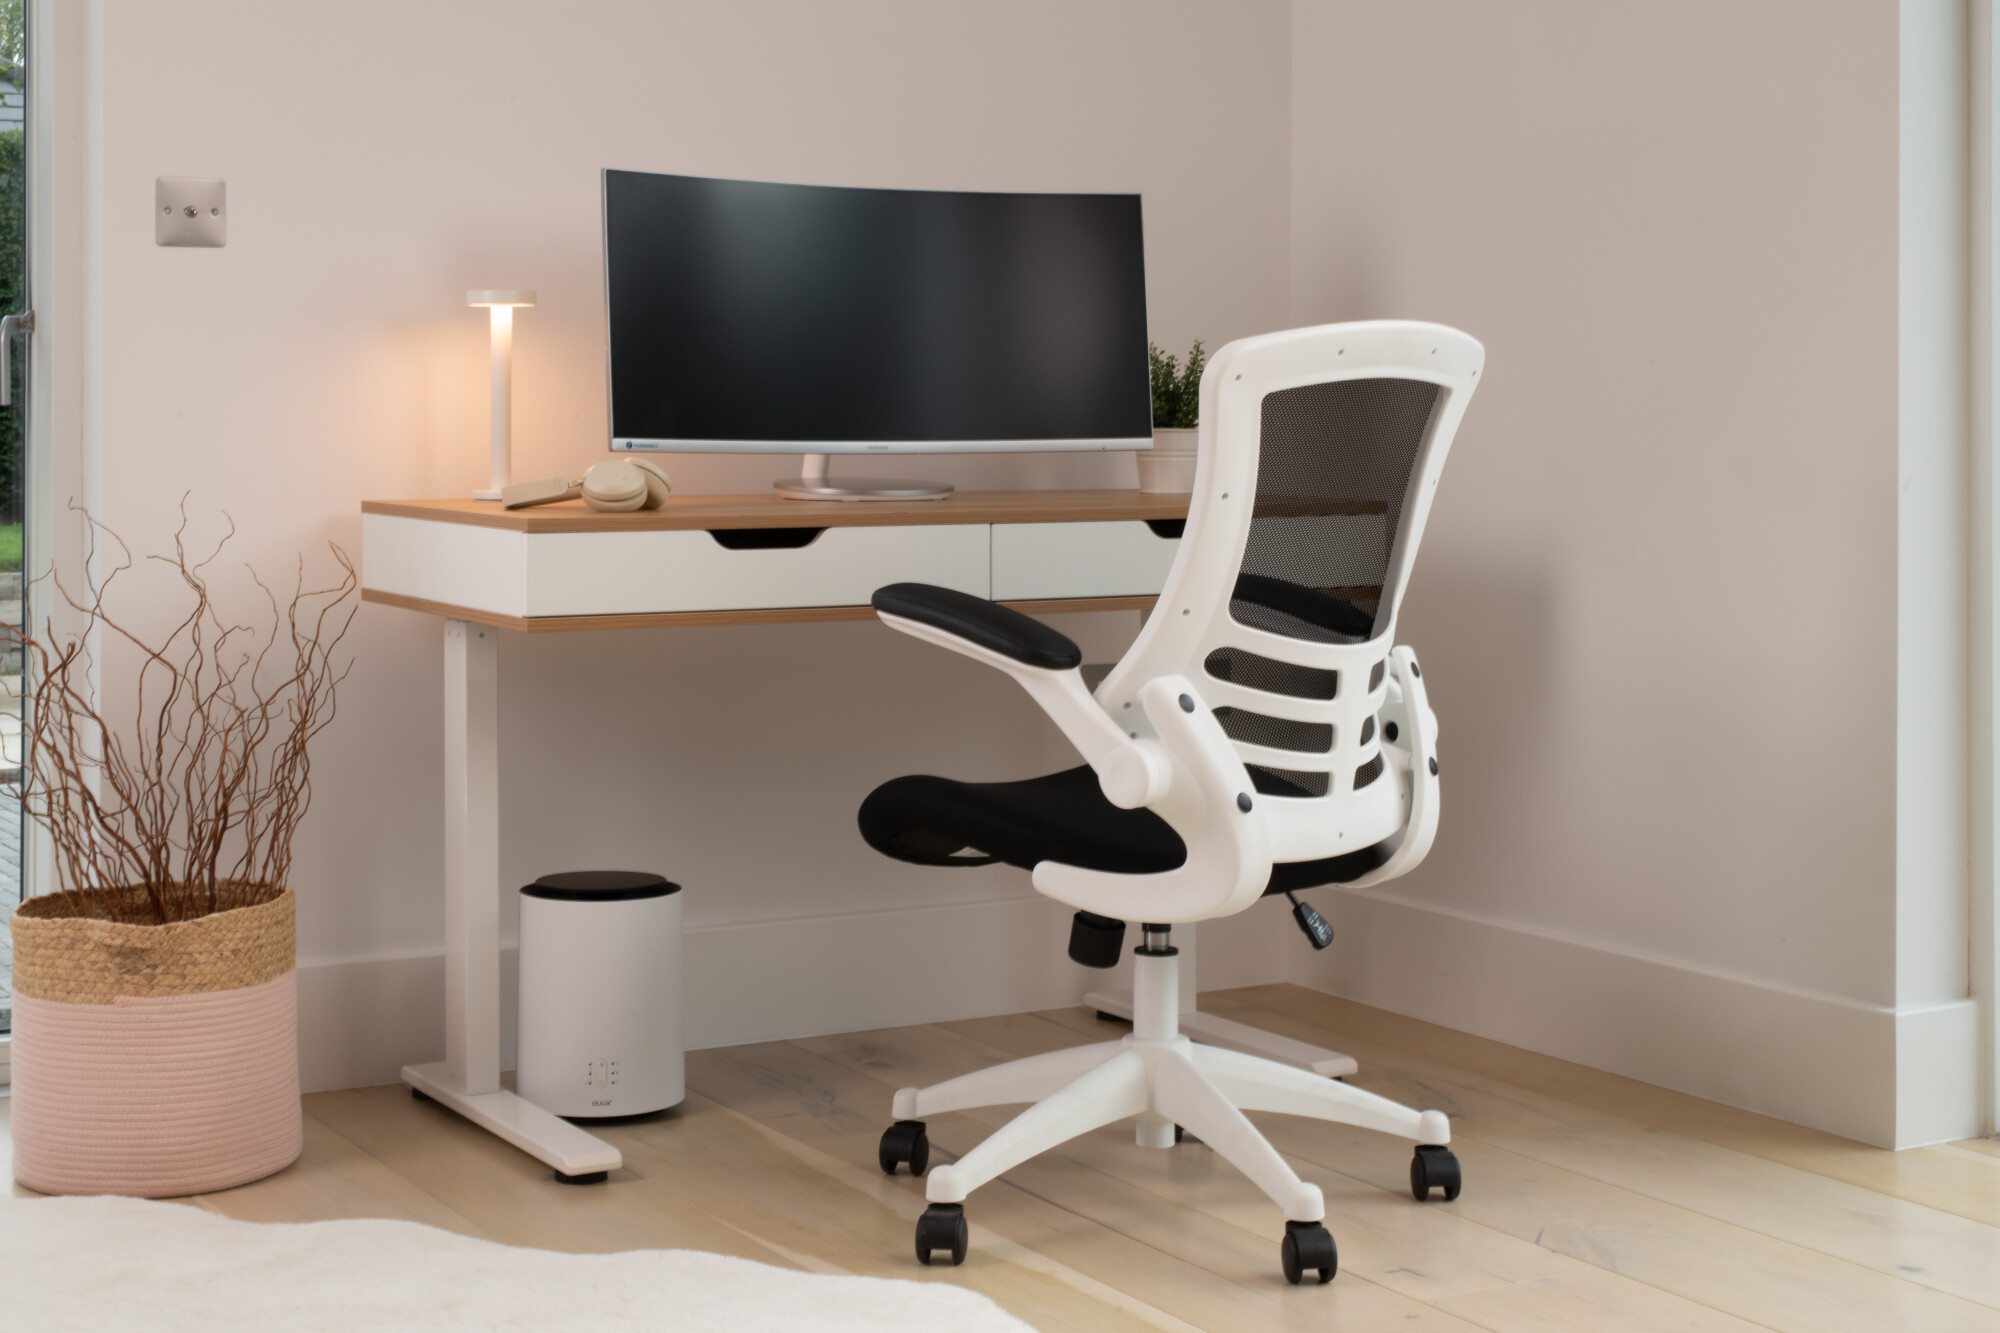 Oak and white smart electric height adjustable desk in an home office setup 